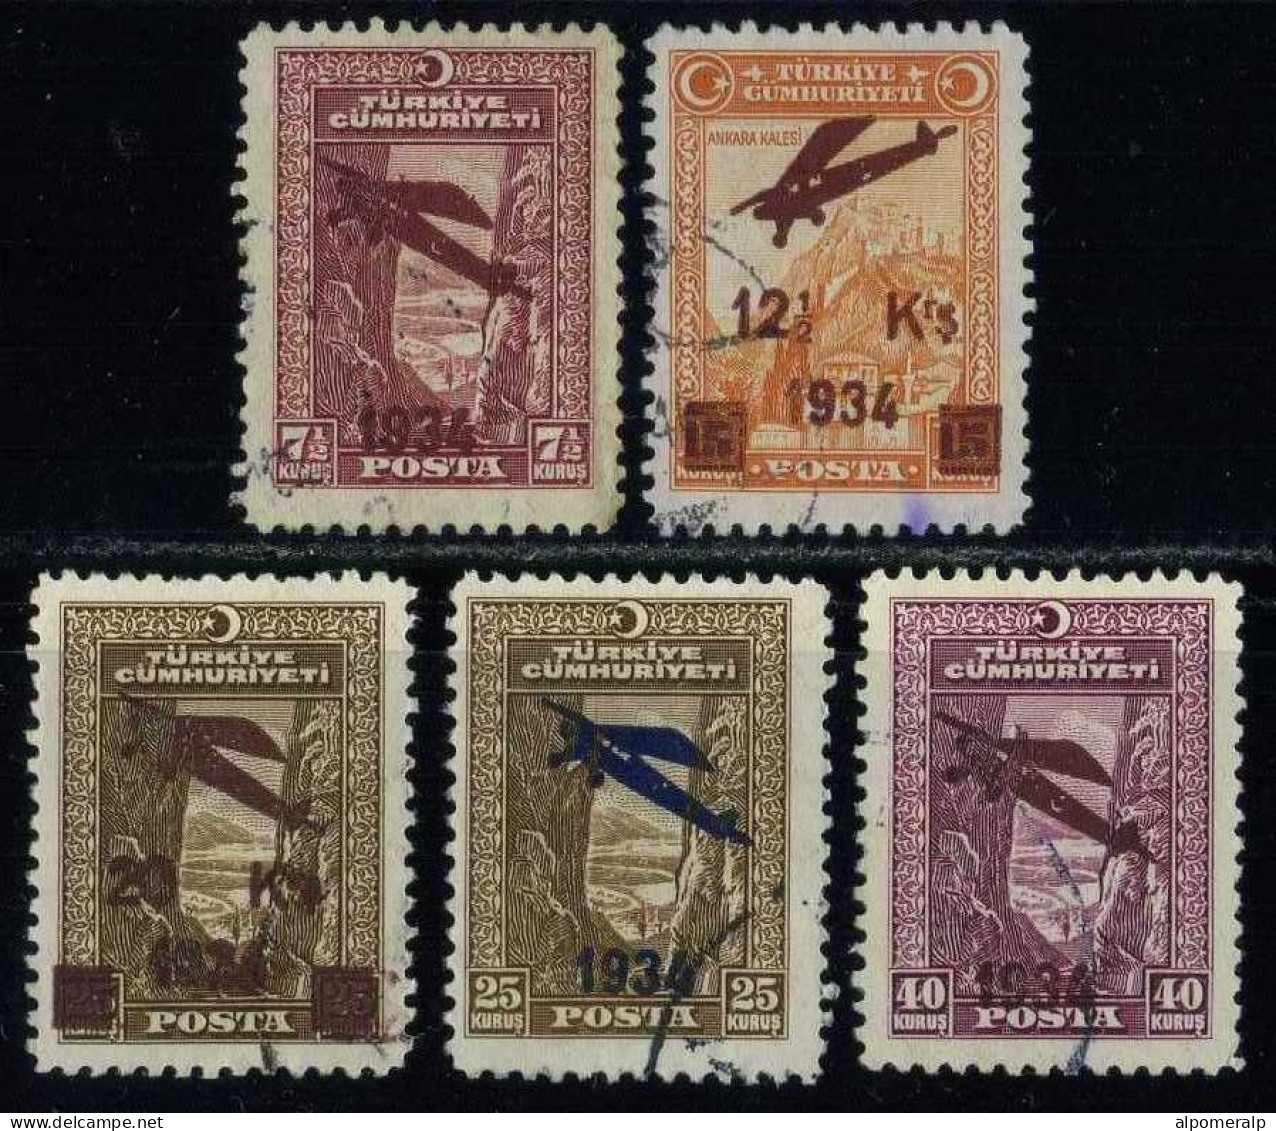 Türkiye 1934 Mi 980-984 Airmail Stamps First Issue, Opening Of The Ankara-Istanbul Airmail Line - Usati